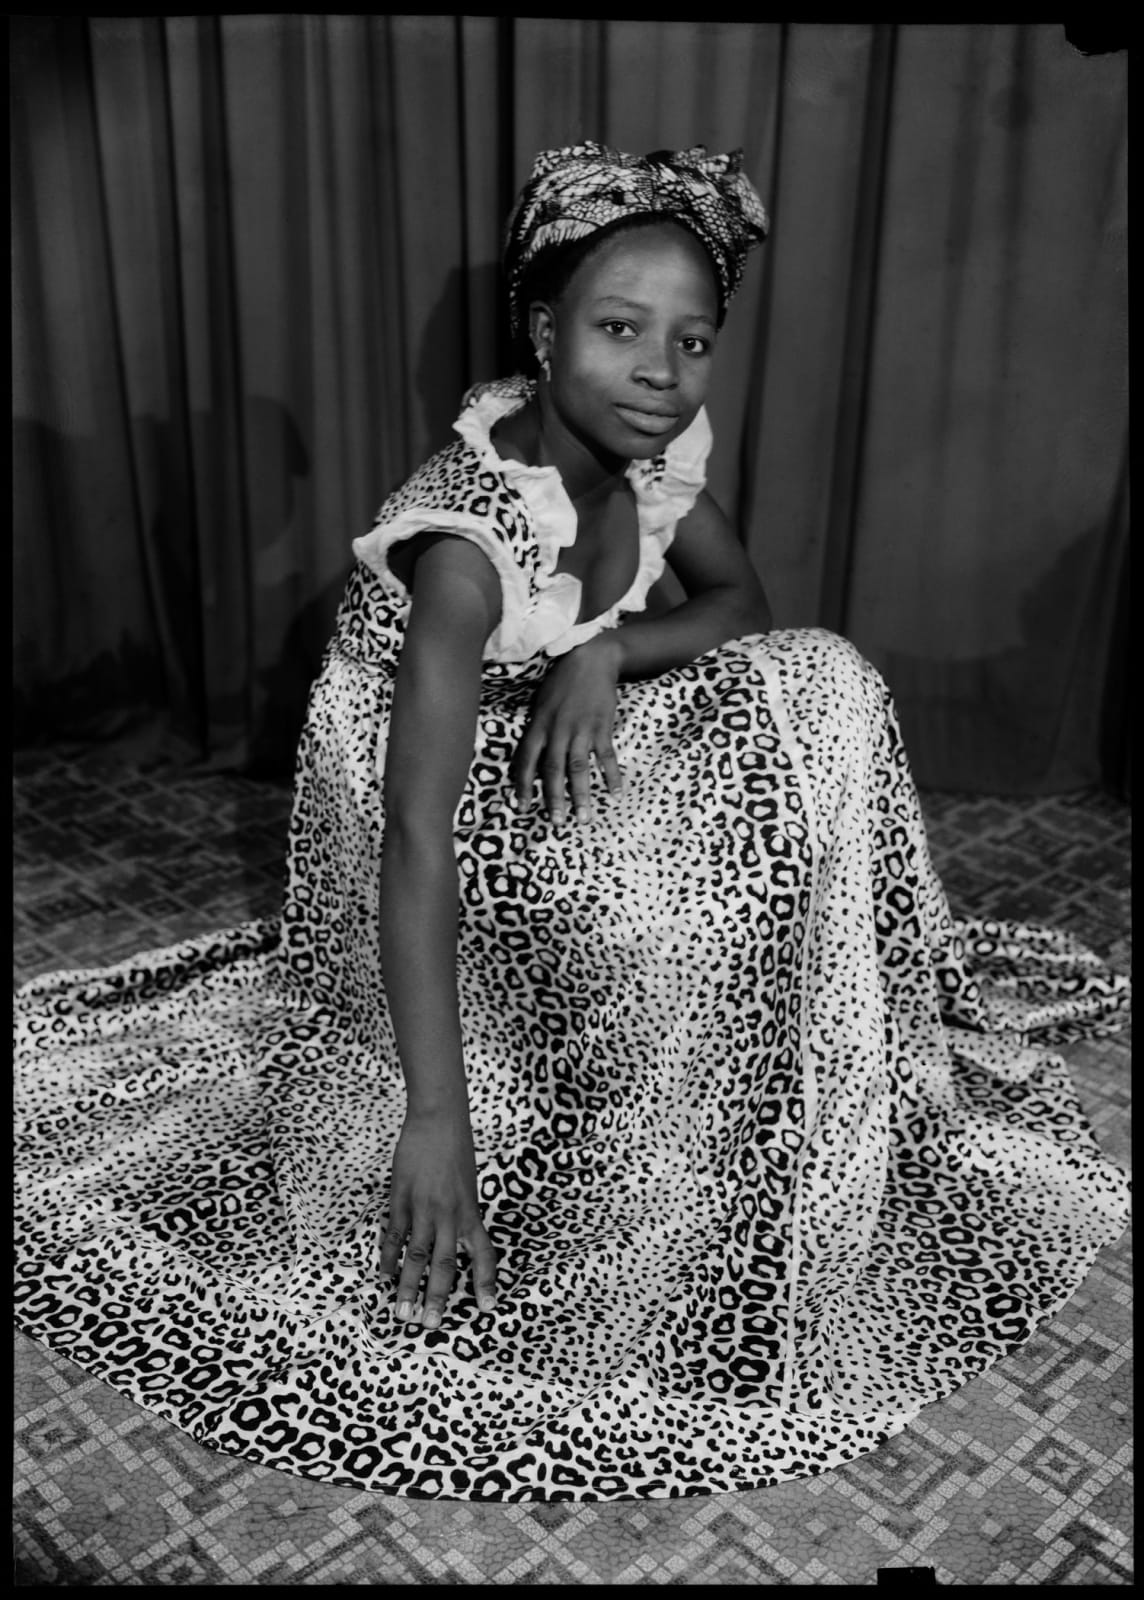 Seydou Keïta Sans titre/ Untitled (05330), 1954-1960 Posthumous Gelatin black and white silver print on cartoline paper 280g 60 x 50 cm (23 5/8 x 19 5/8 in.) Edition of 10 + 2 AP Posthumous Gelatin black and white silver print on cartoline paper 280g back-mounted on Aluminium 1mm 162 x 122 cm (63 25/32 x 48 1/32 in) Edition of 5 + 2 AP